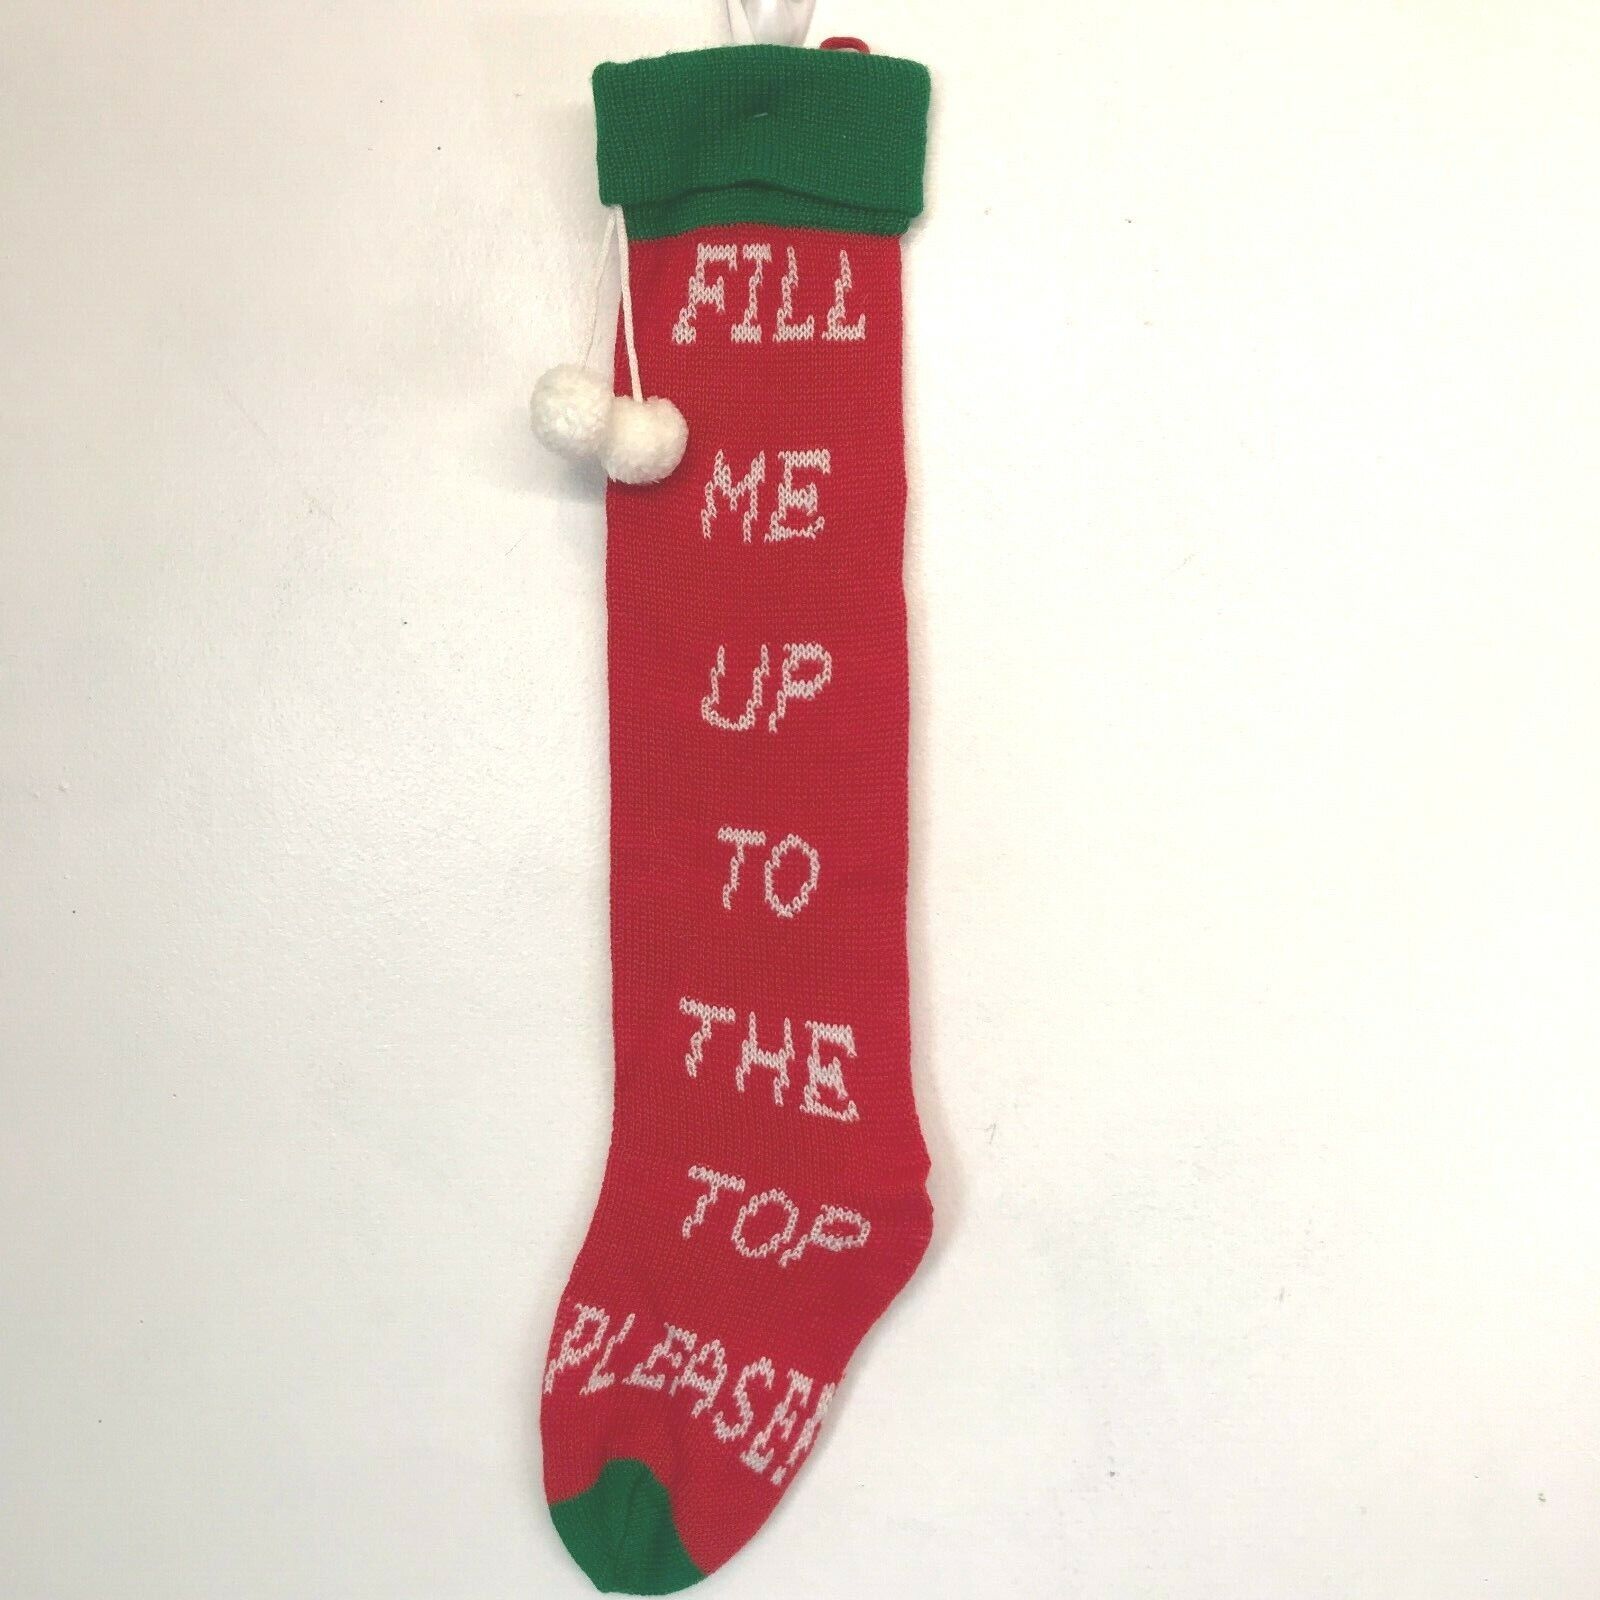 Primary image for Vintage Christmas Knit Stocking 24" Fill Me Up to the Top Please Pom Pom ST